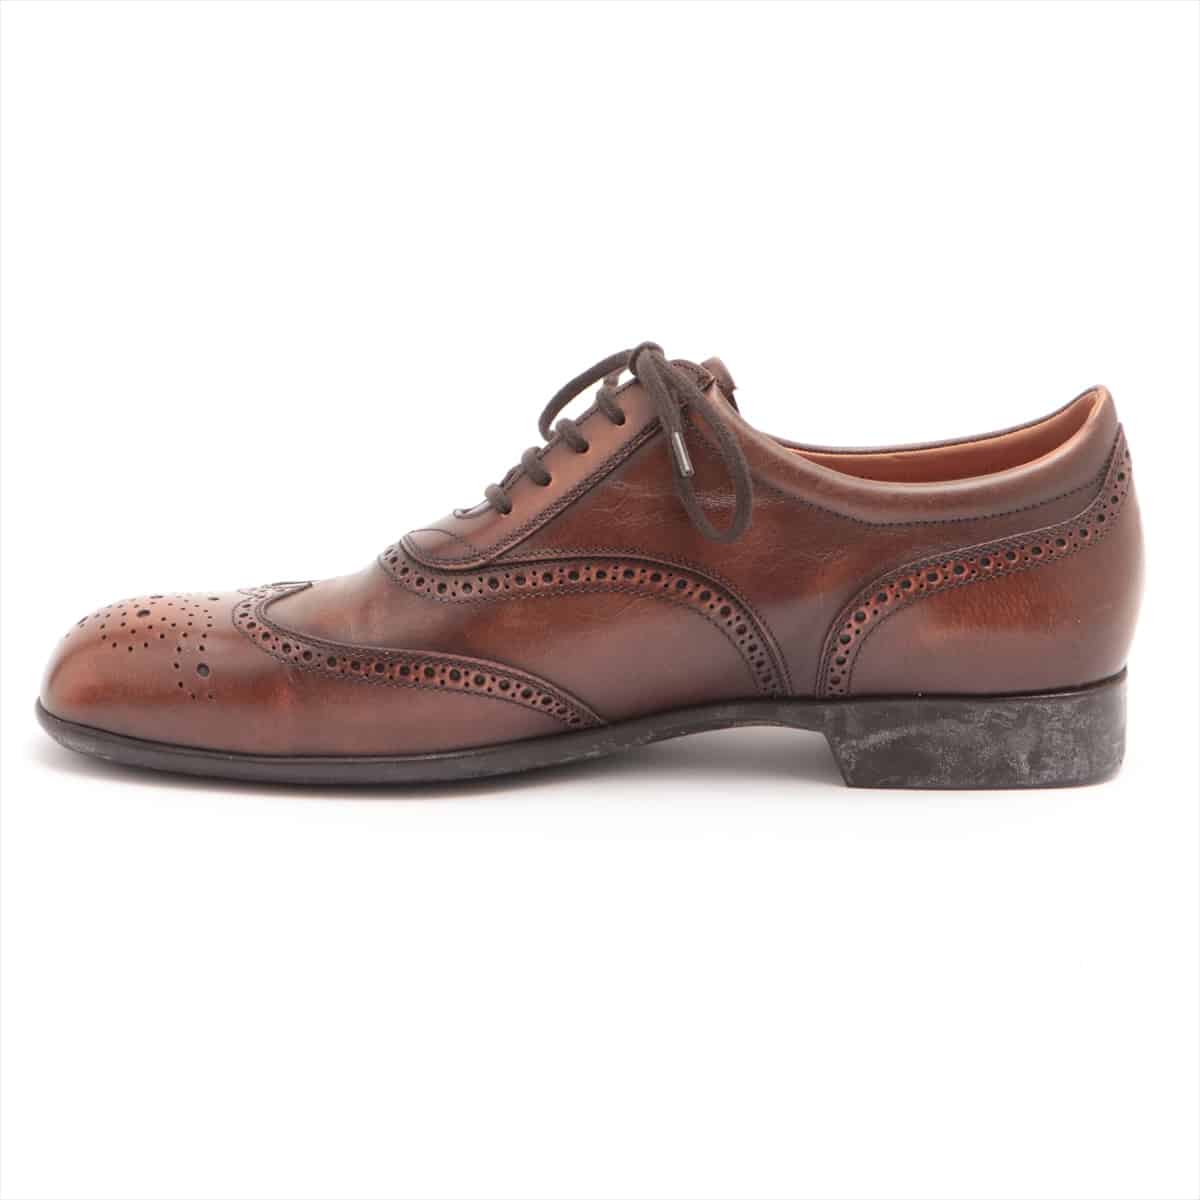 J. M. Weston Leather Leather shoes 9.5 Men's Brown wingtip Comes with genuine shoe keeper